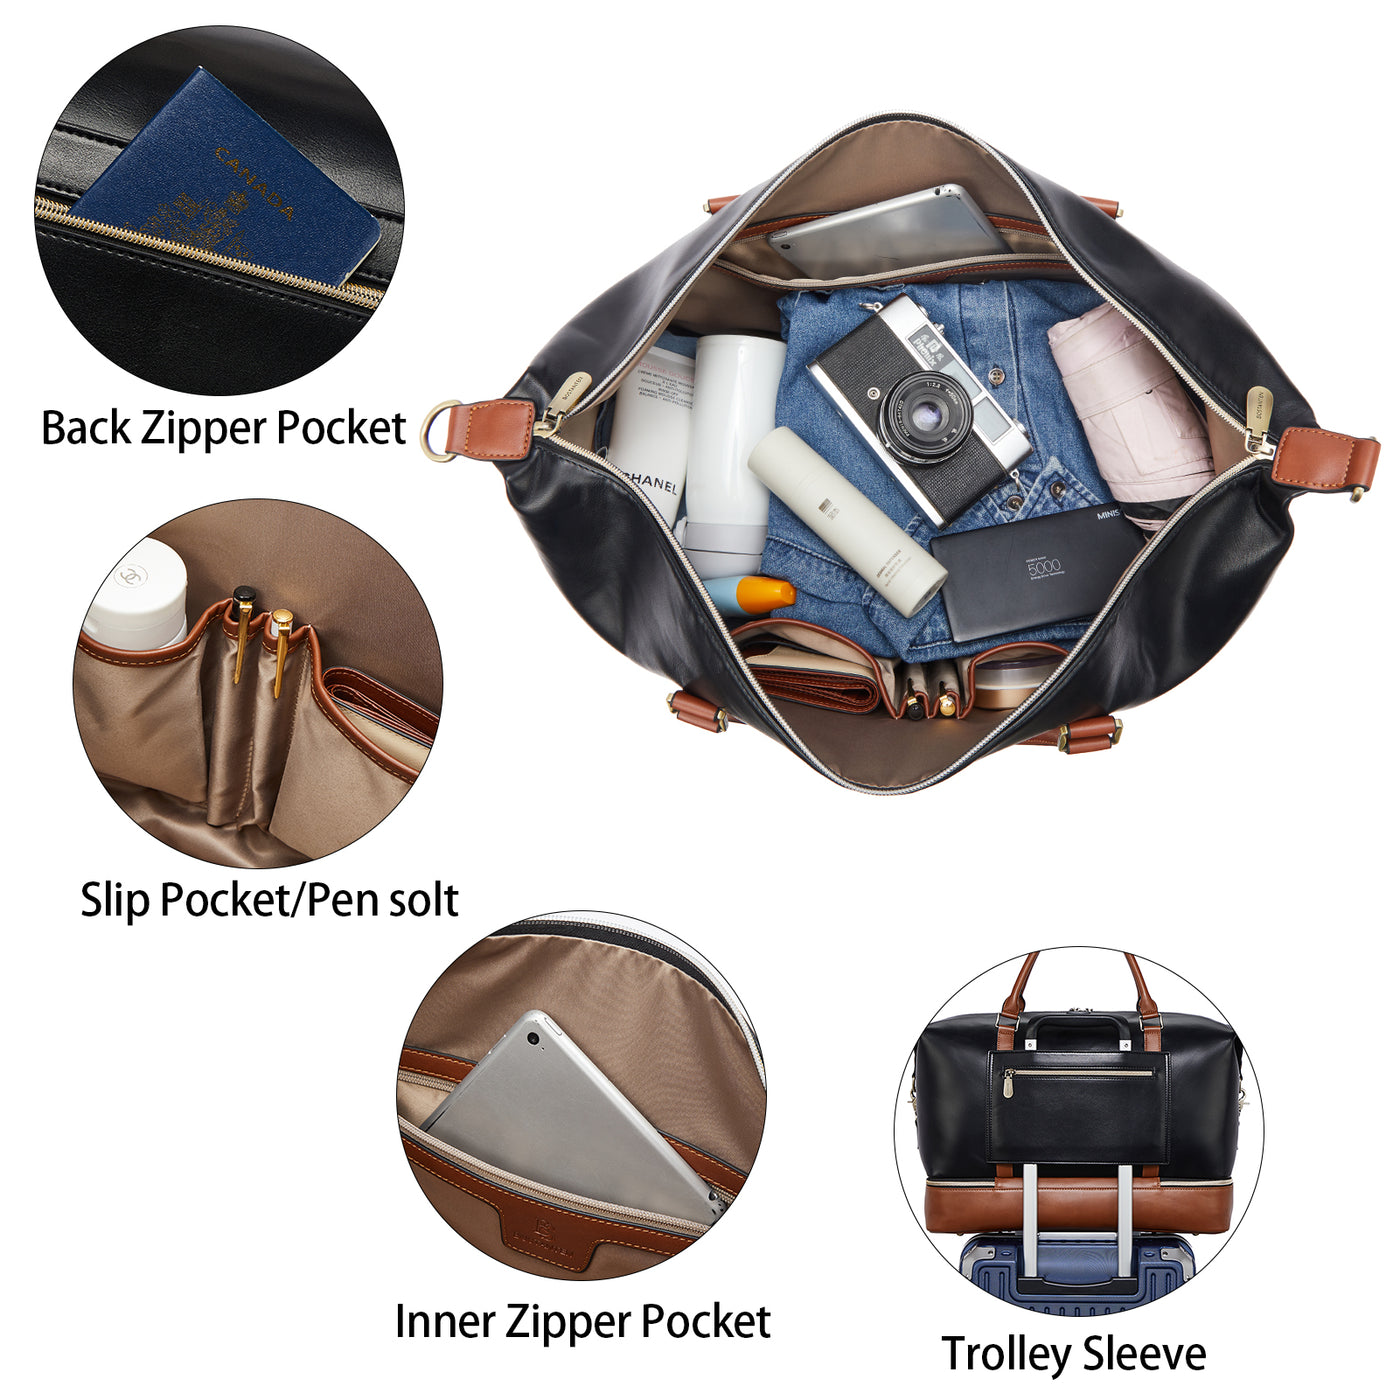 Judea Leather Travel Duffle Bag with Multiple Compartments